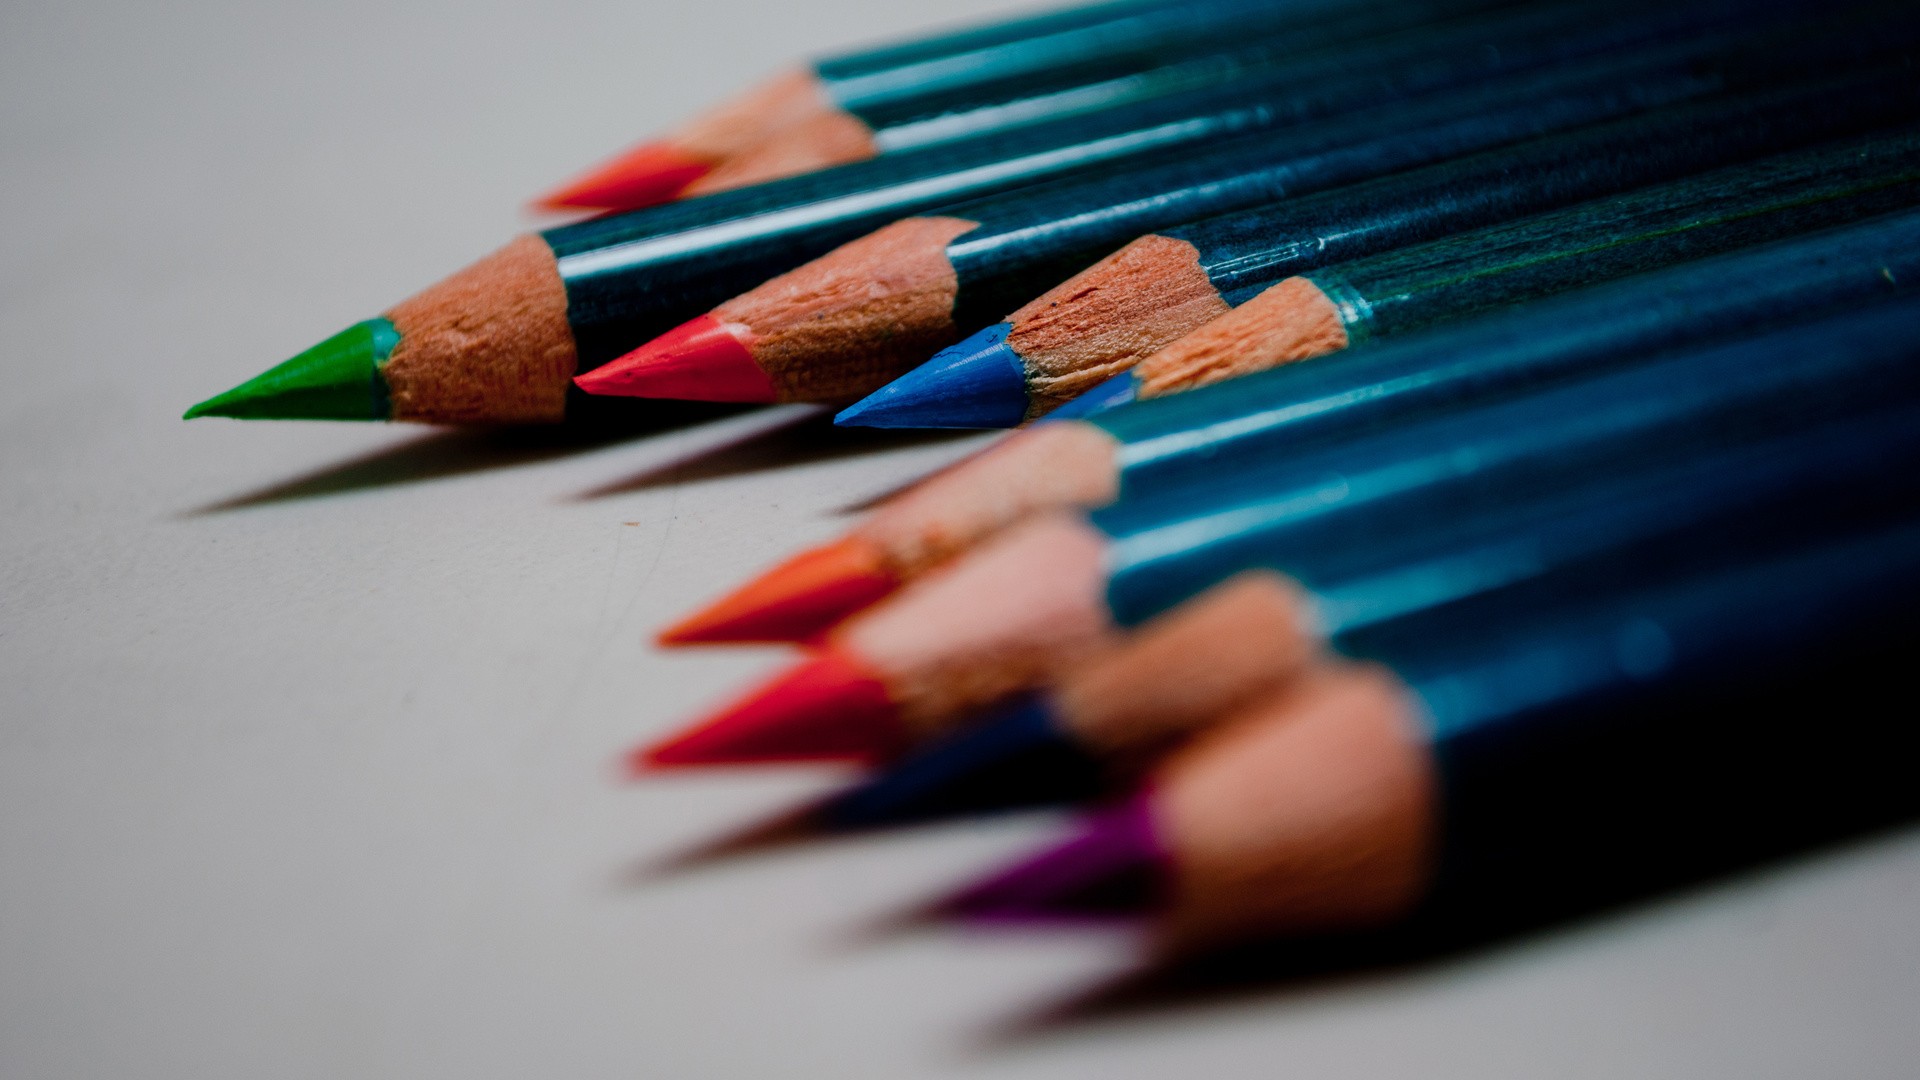 General 1920x1080 pencils blue colorful sharp depth of field shadow gray background closeup